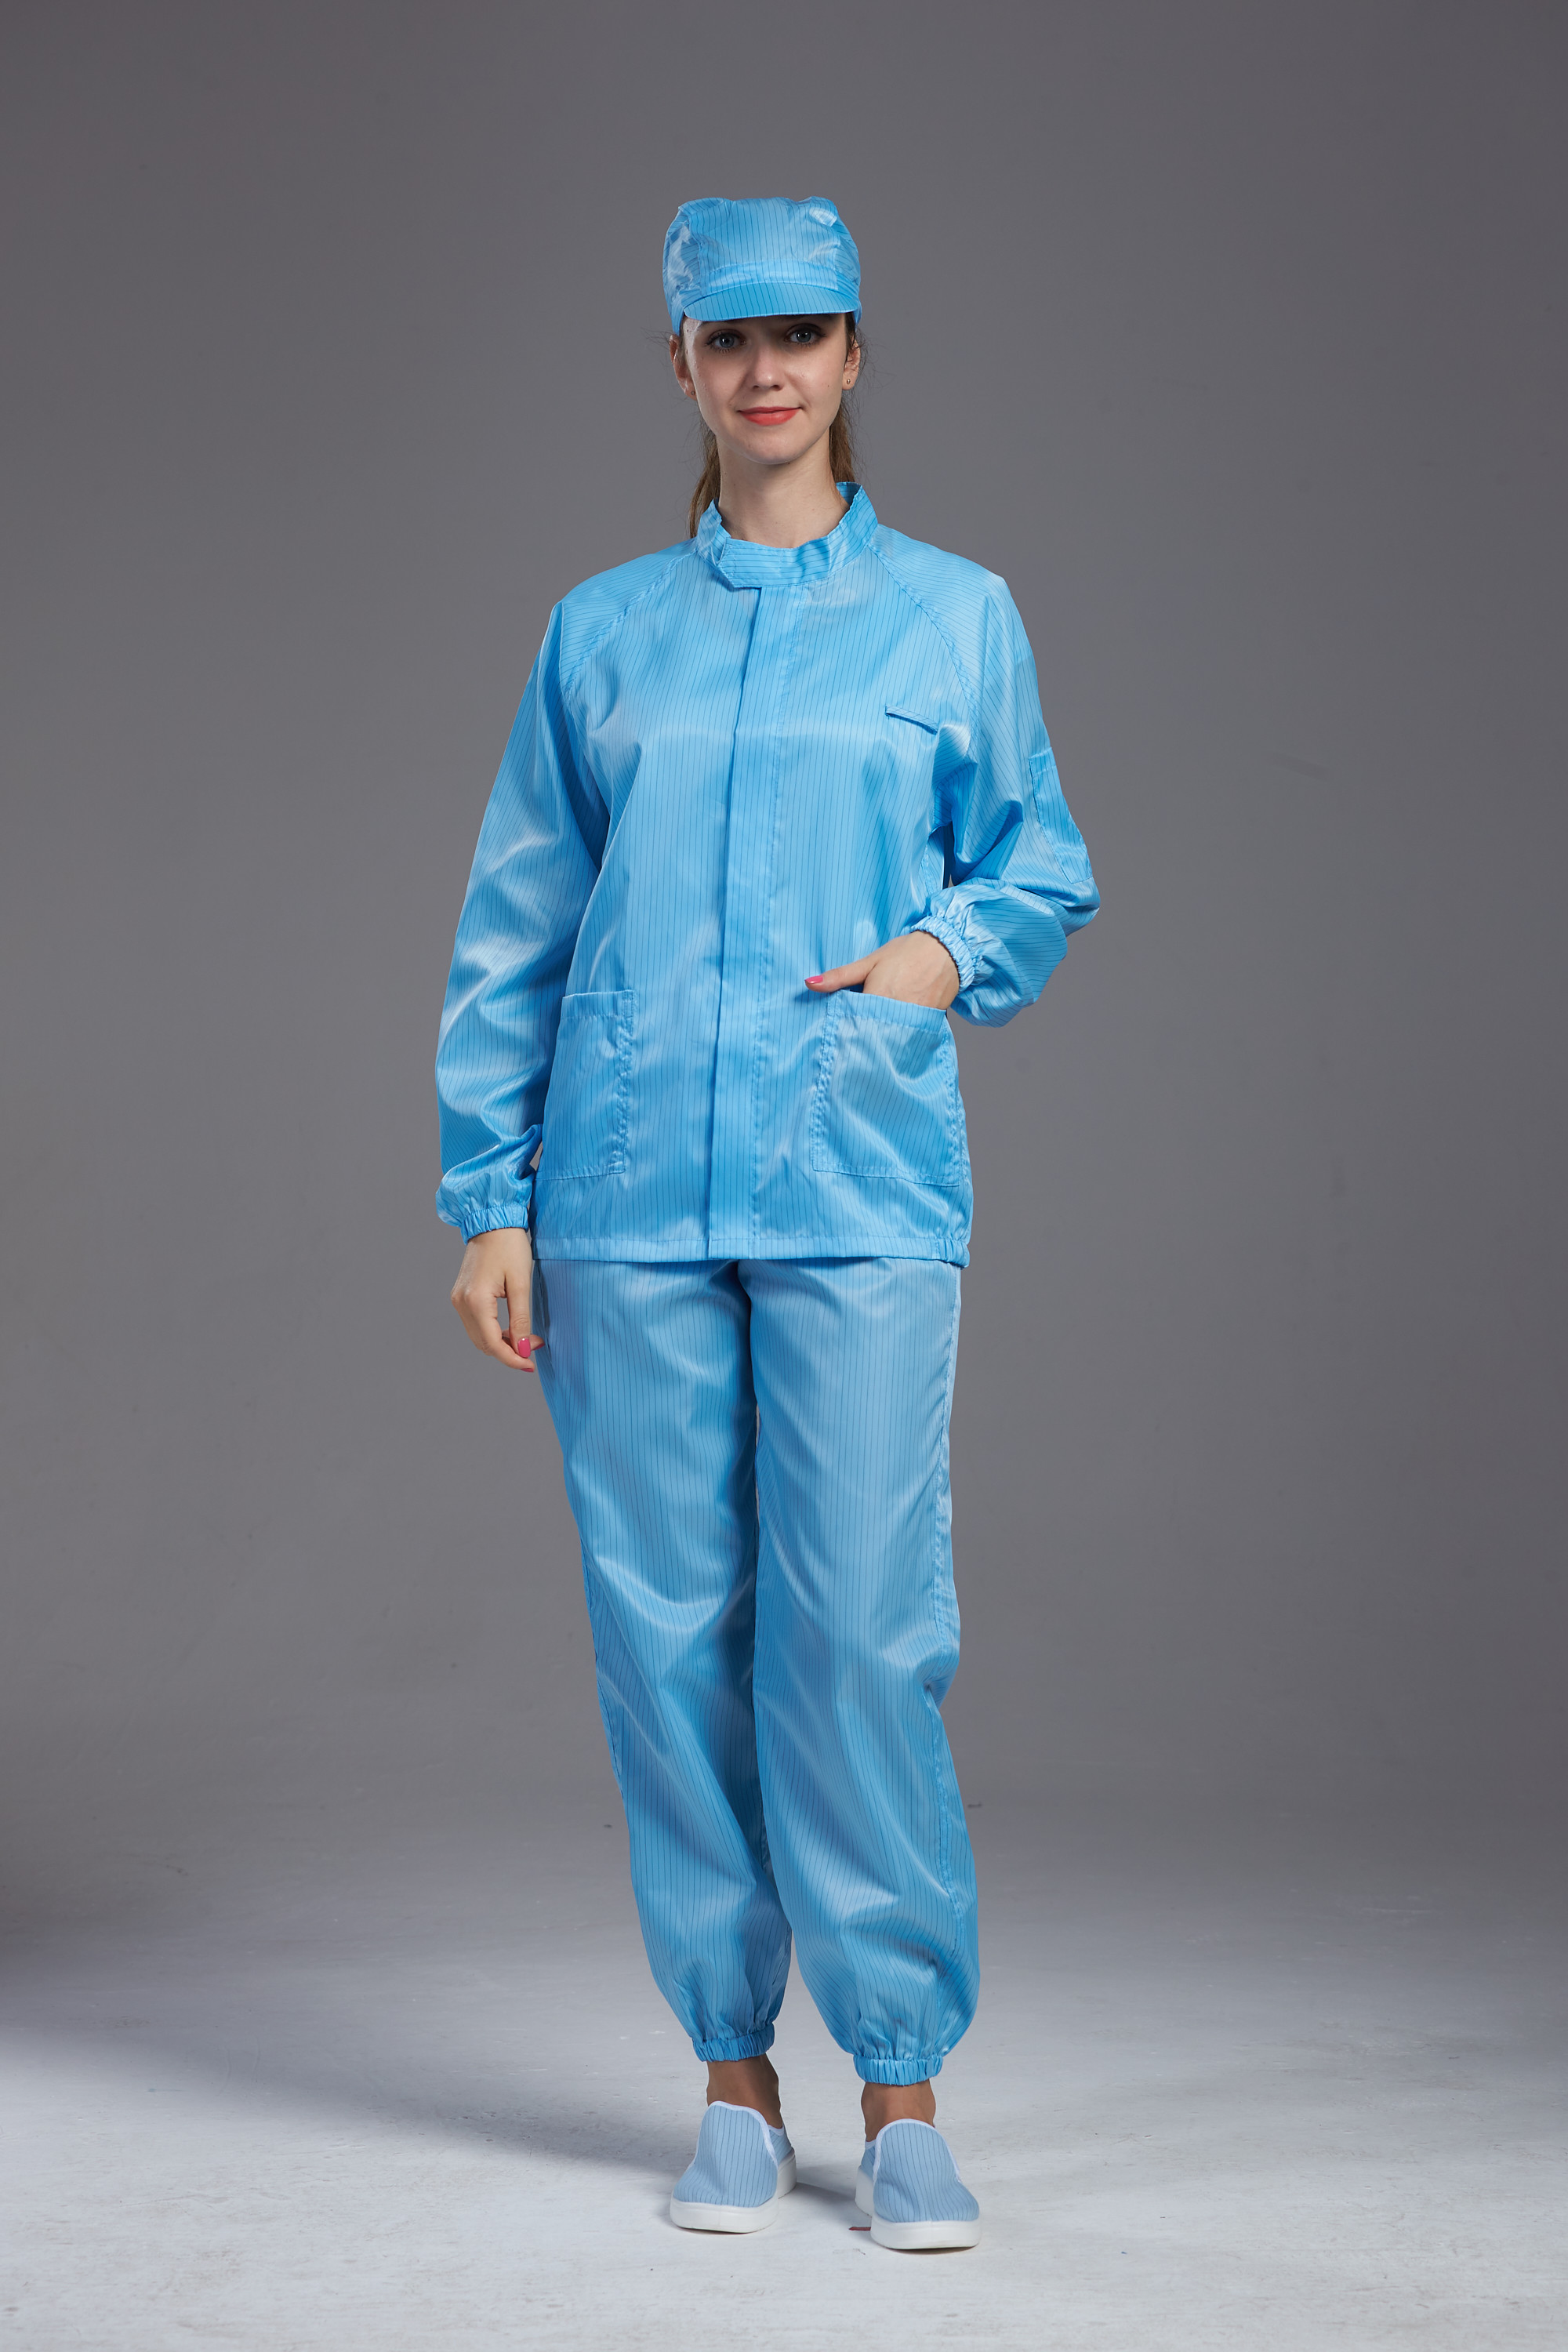 Best Blue Clean Room Clothes Anti Static S-5XL Sized In Pharmaceutical Workshop wholesale